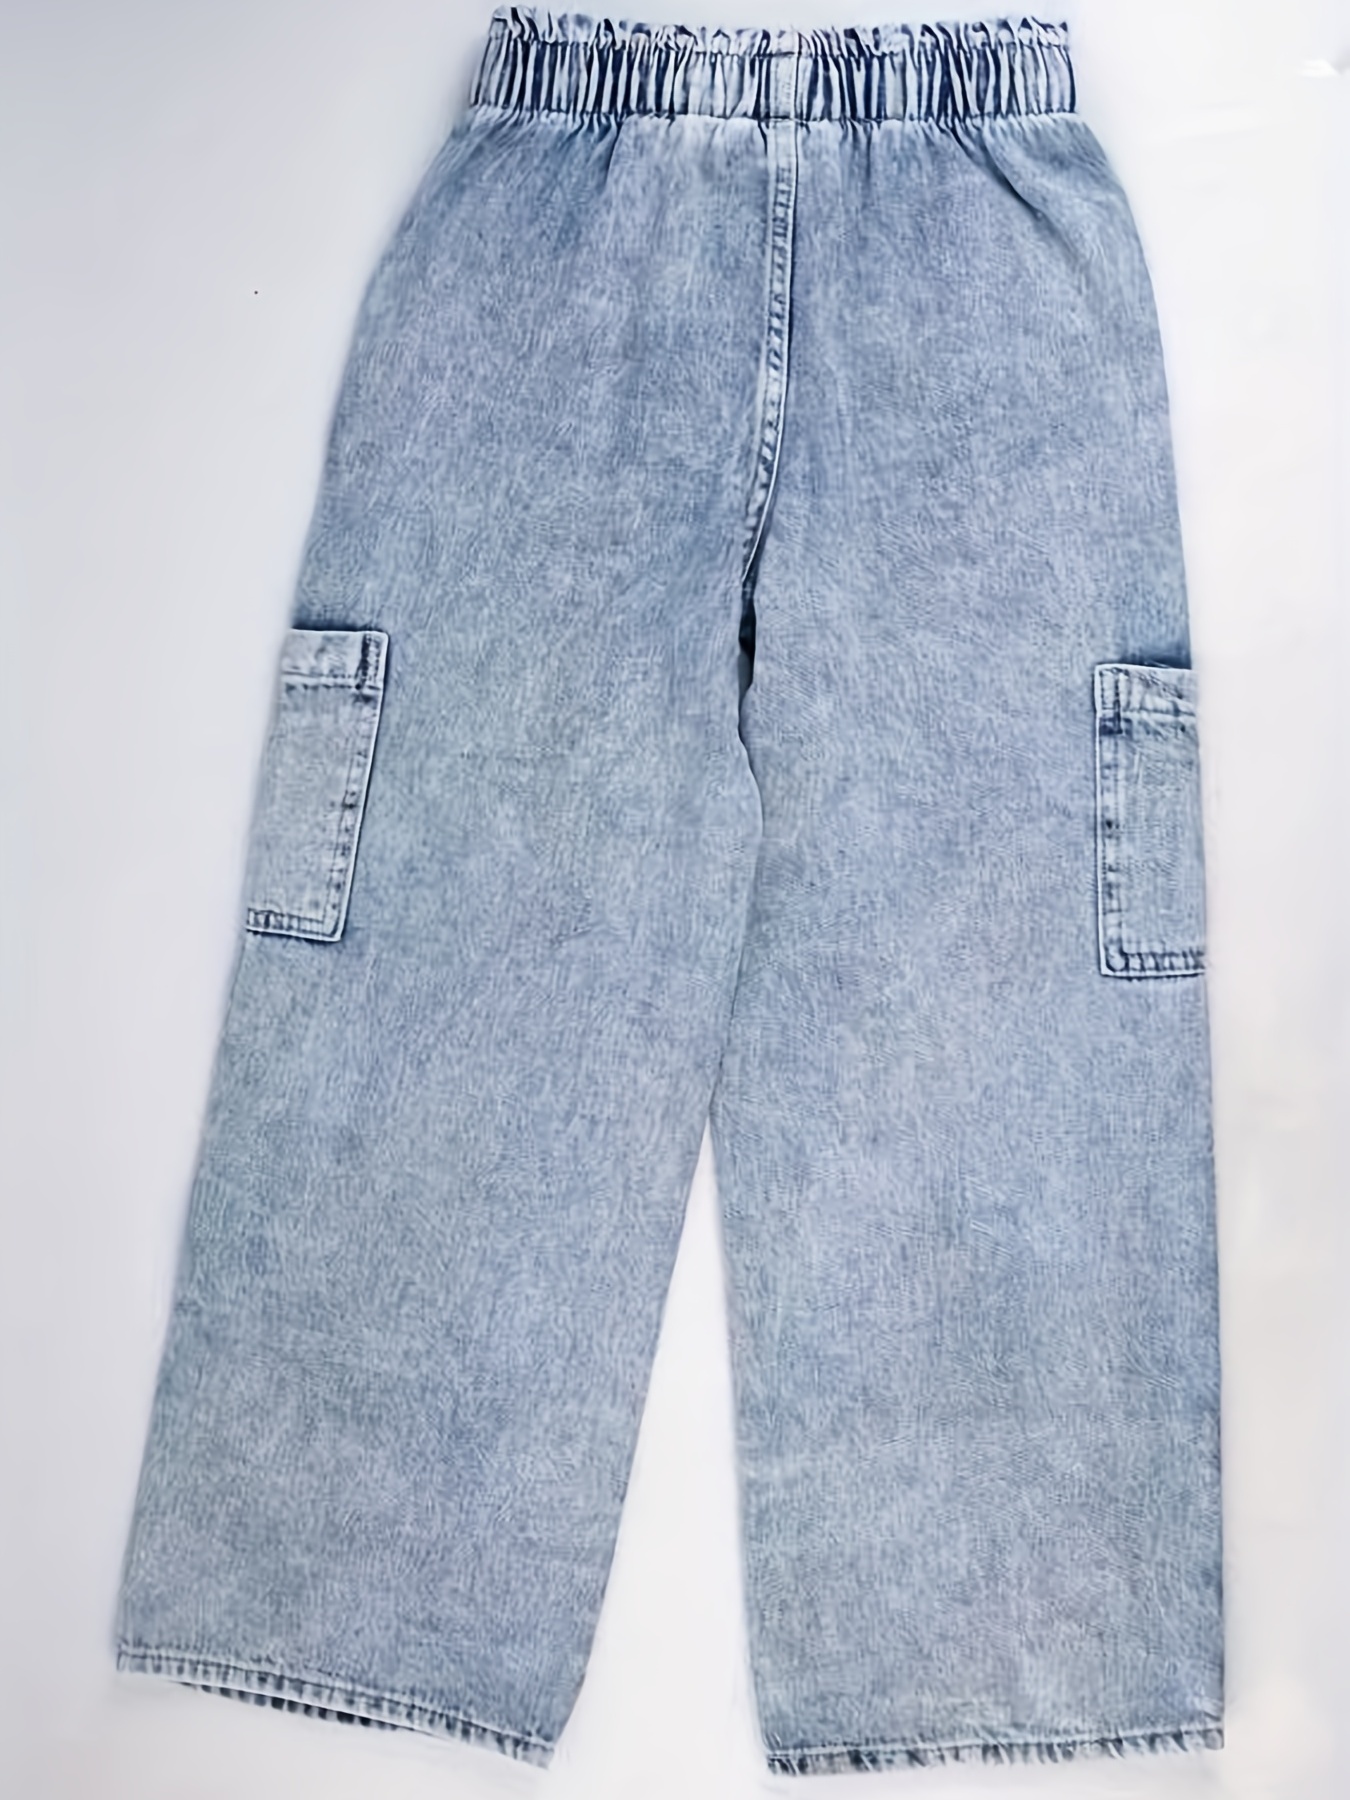 Vintage Cotton Cargo Pants For Boys Spring/Autumn Fashion Wide Leg Trouser  Jeans For Kids, Ages 14 5 L230518 From Us_nebraska, $11.5